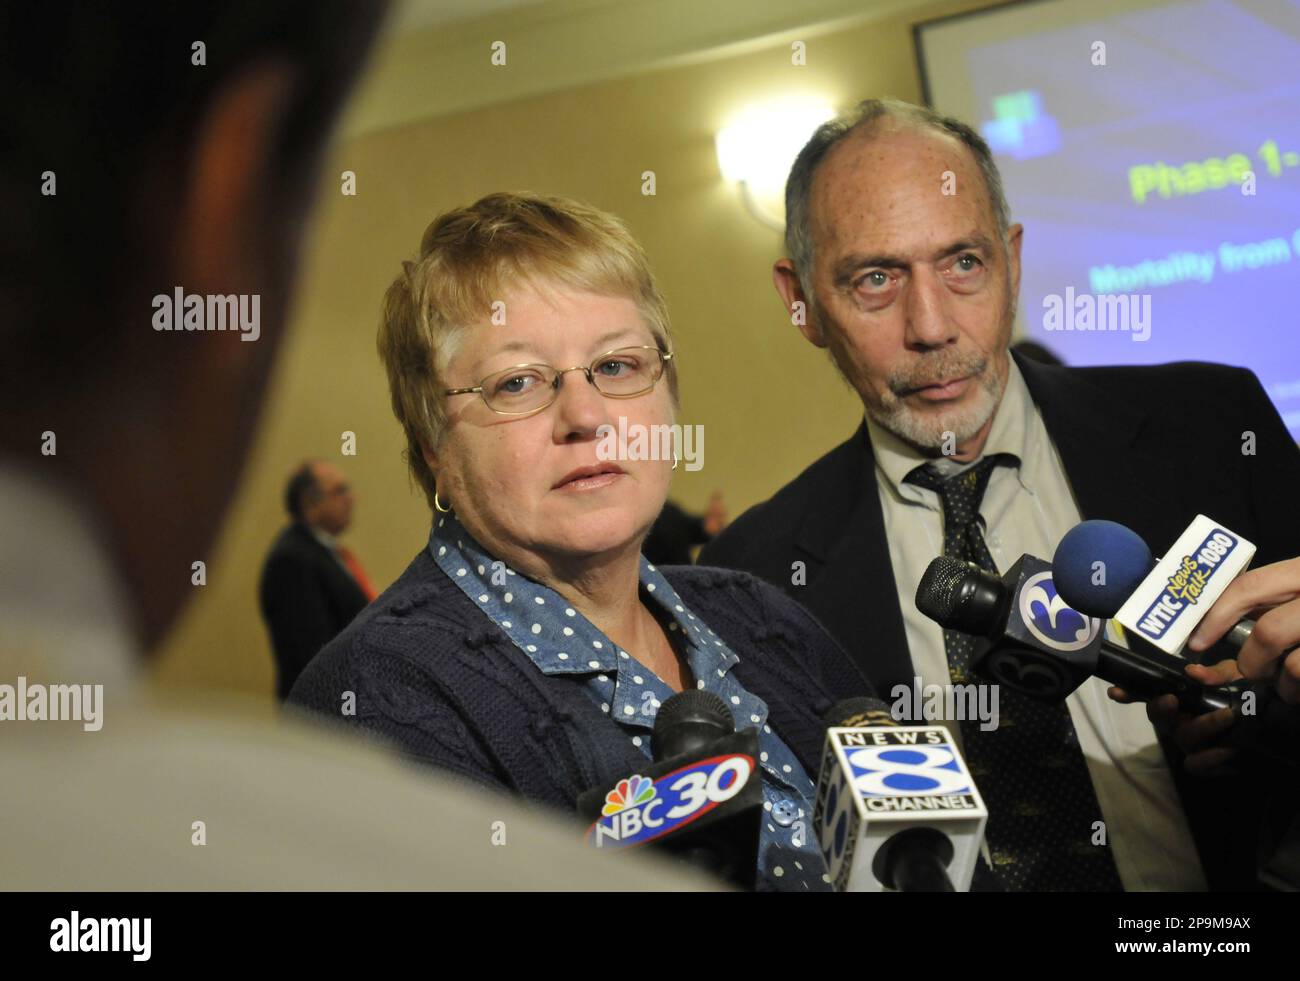 Carol Shea, left, who lost her husband to brain cancer, and Attorney  Matthew Shafner talk to the media after First Phase results from the Patt &  Whitney Cancer Study were released in